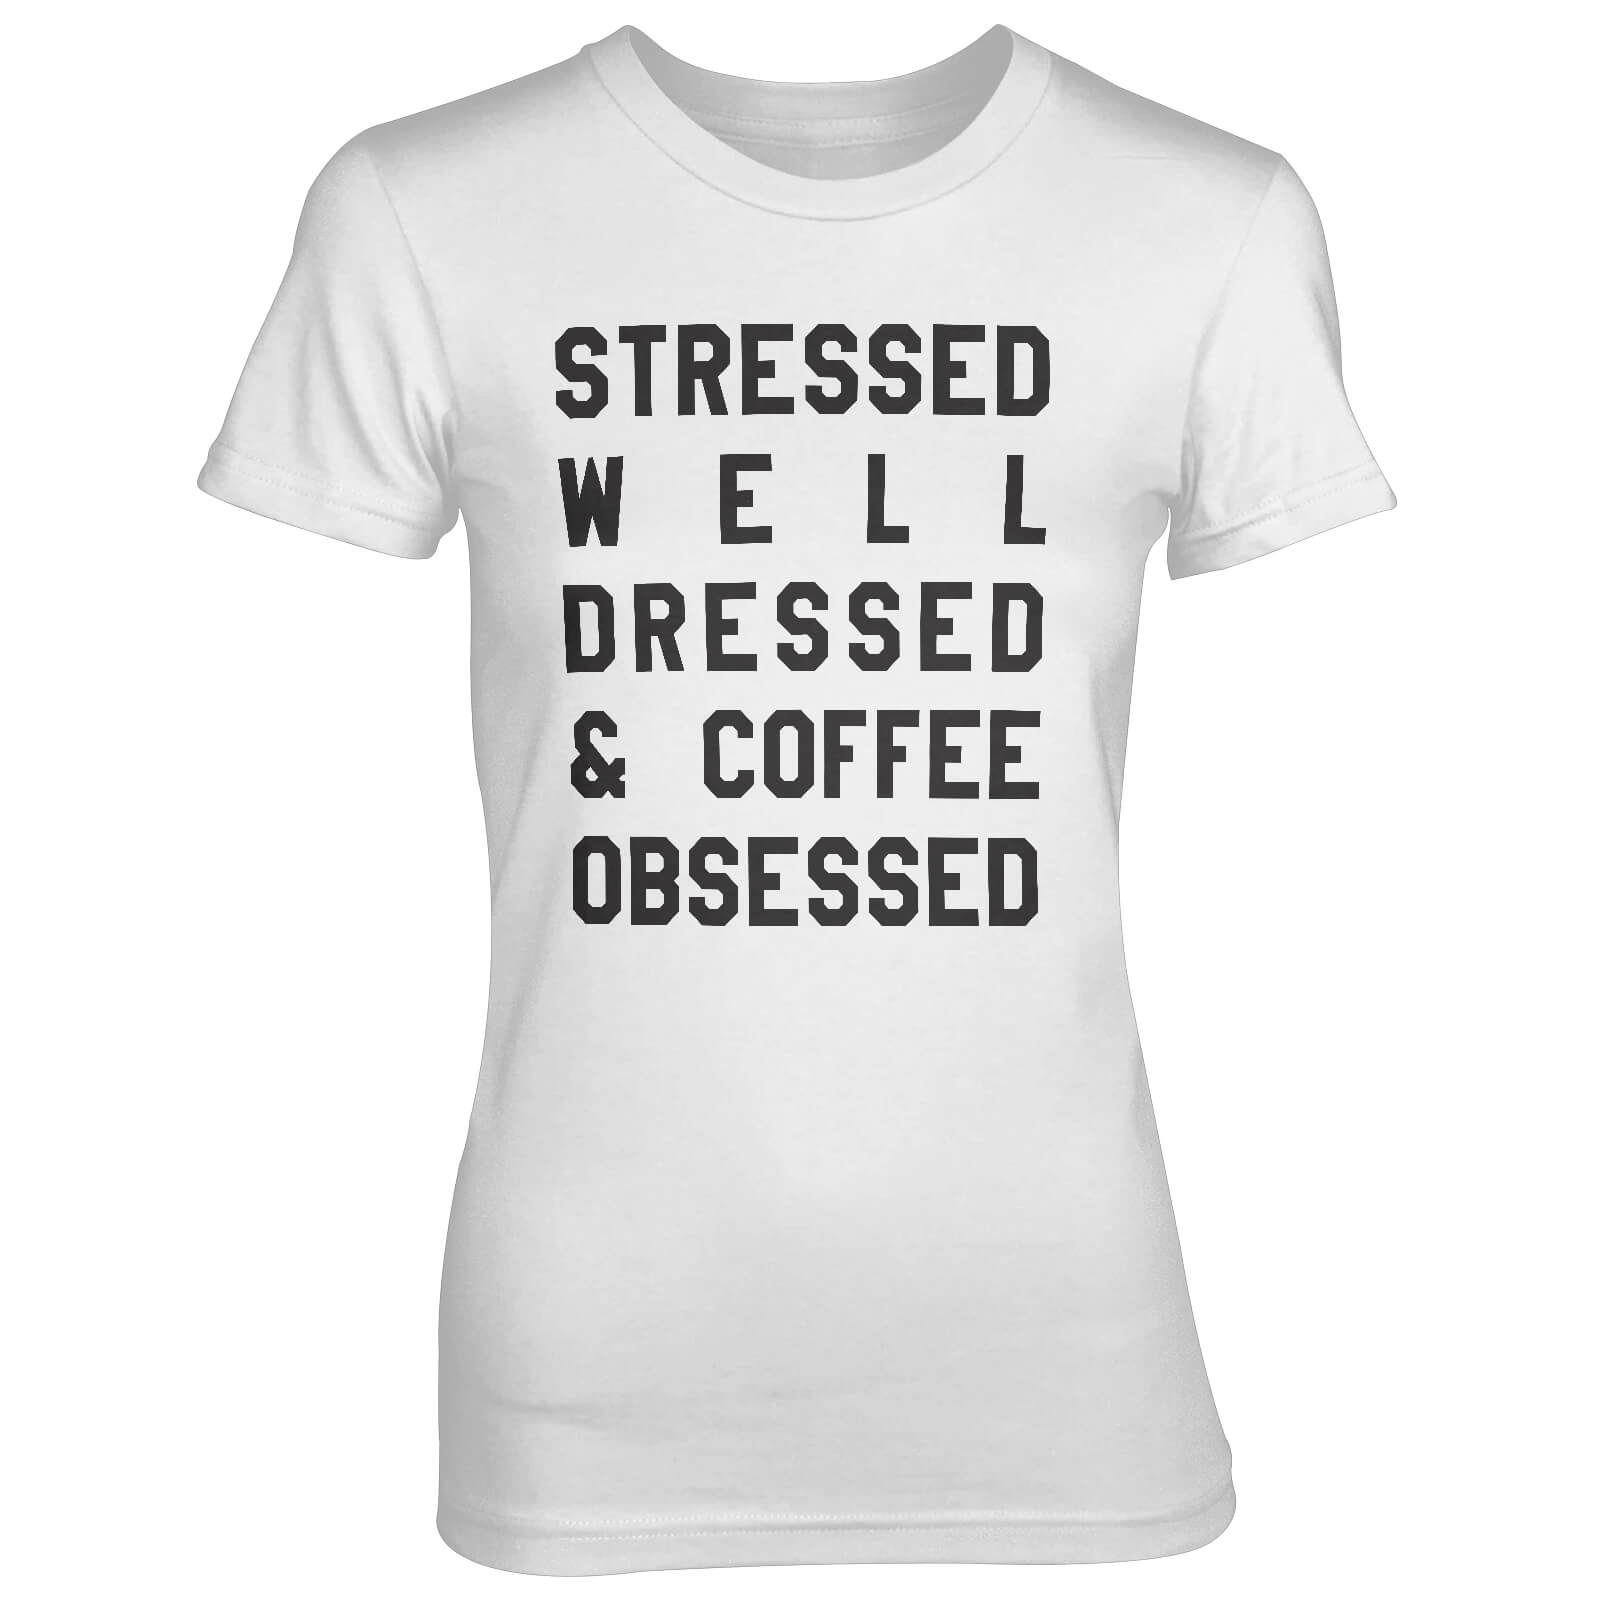 Stressed Well Dressed And Coffee Obsessed Women's White T-Shirt - S - White